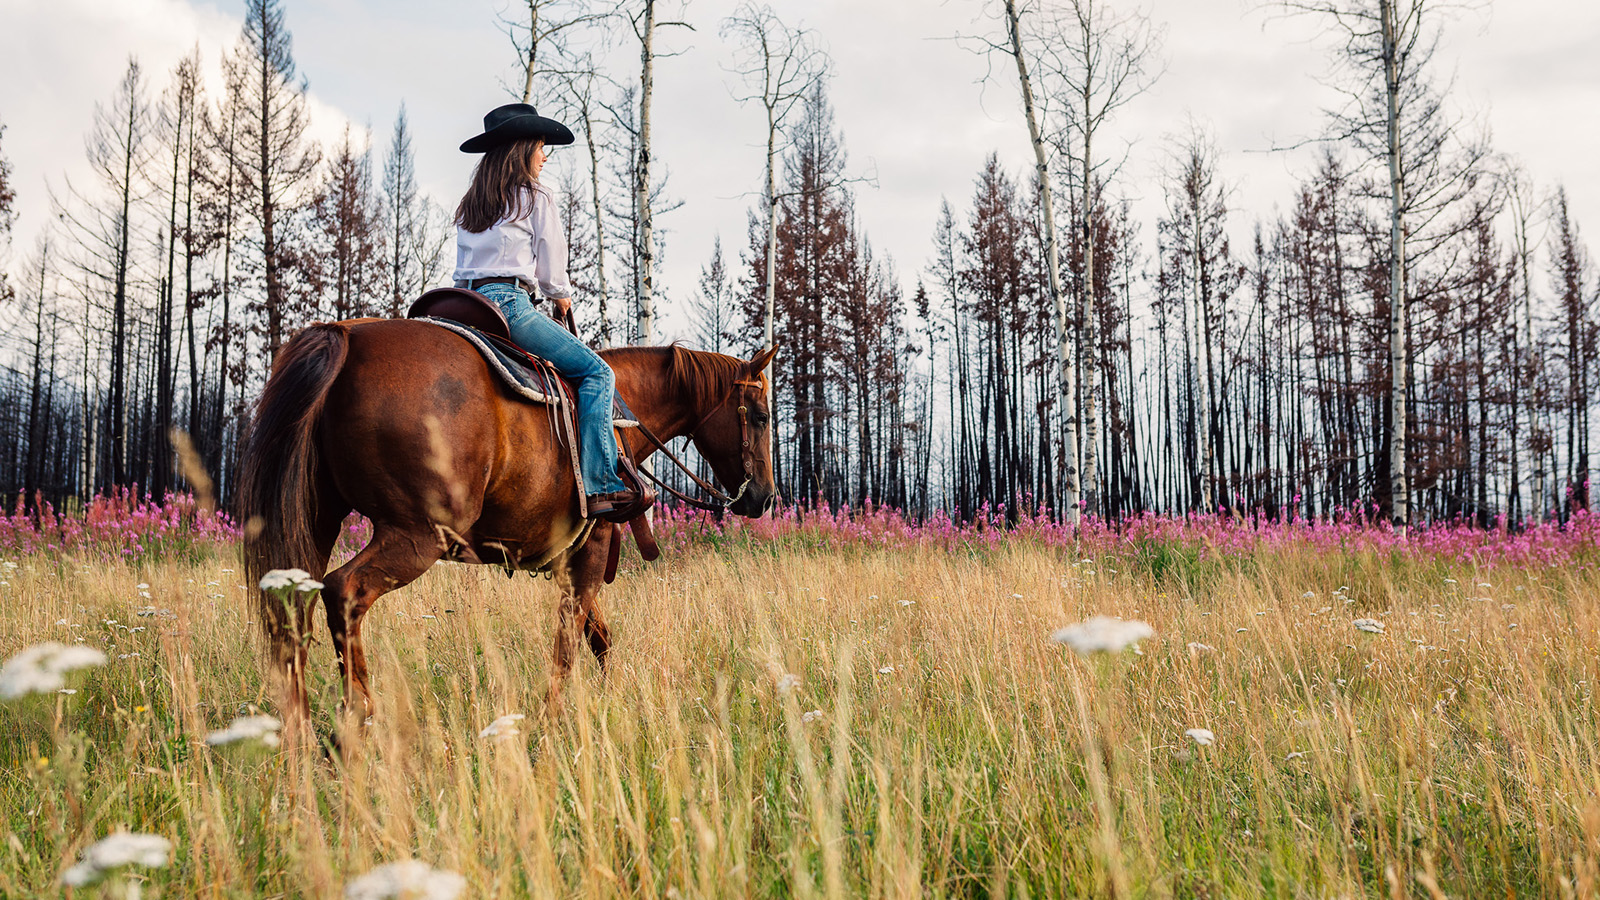 Full day horse riding adventures in the British Columbia wilderness